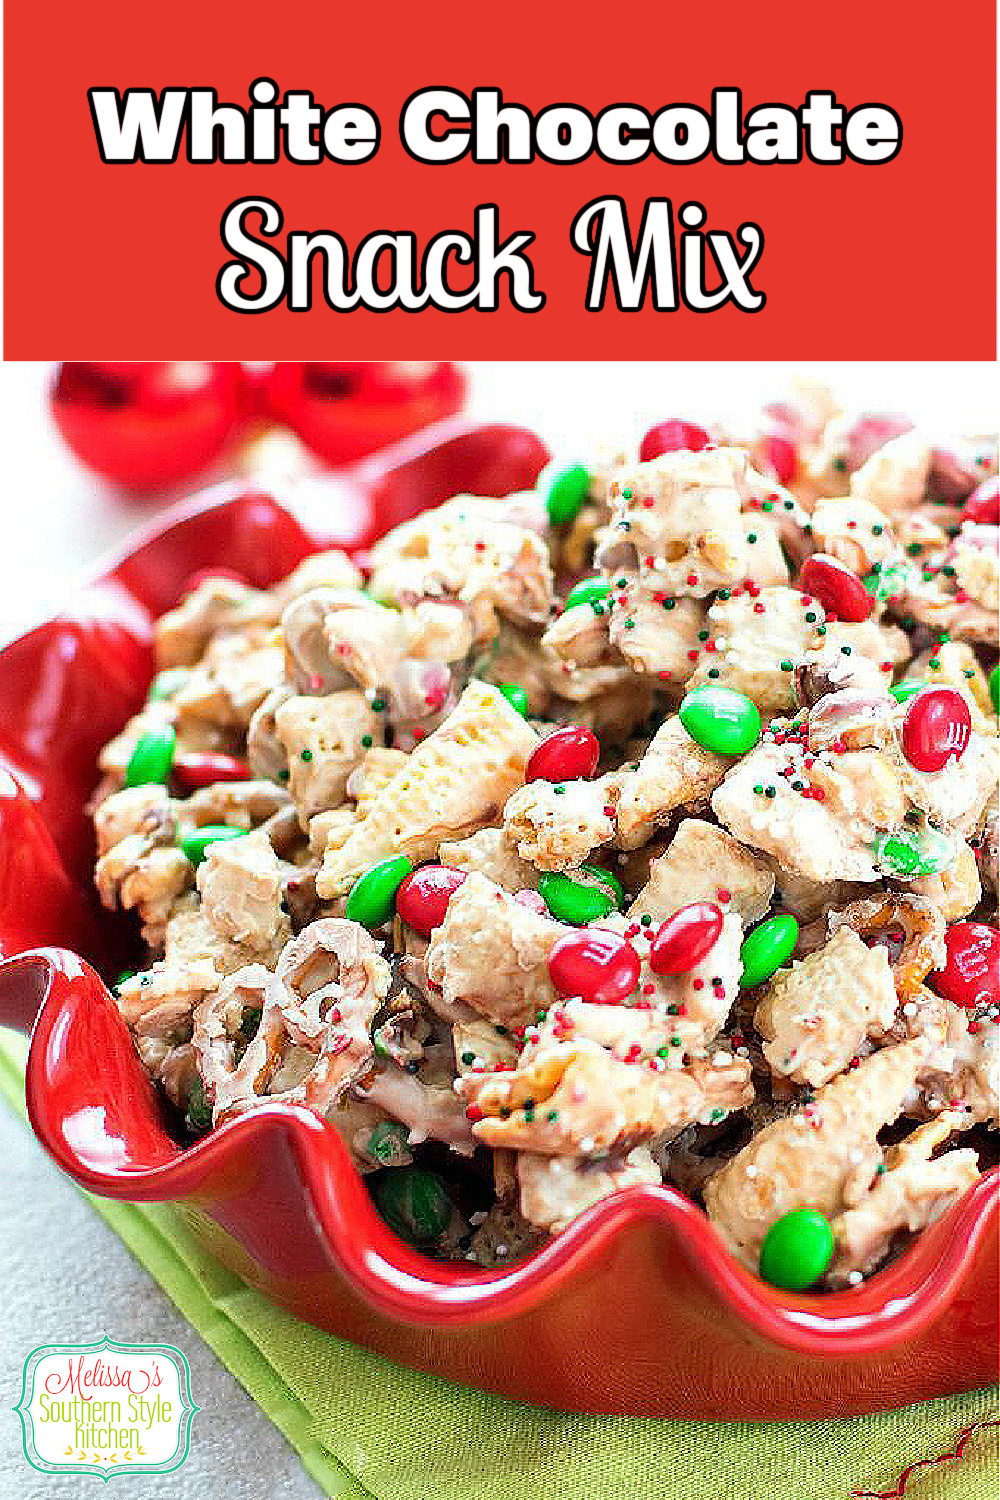 A balanced diet is some of this White Chocolate Holiday Snack Mix in each hand #whitechocolatesnackmix #whitechocolate #snackmix #christmassnacks #holidayreccipes #sweets #desserts #dessertfoodrecipes #chocolate #Christmascandy #holidayrecipes